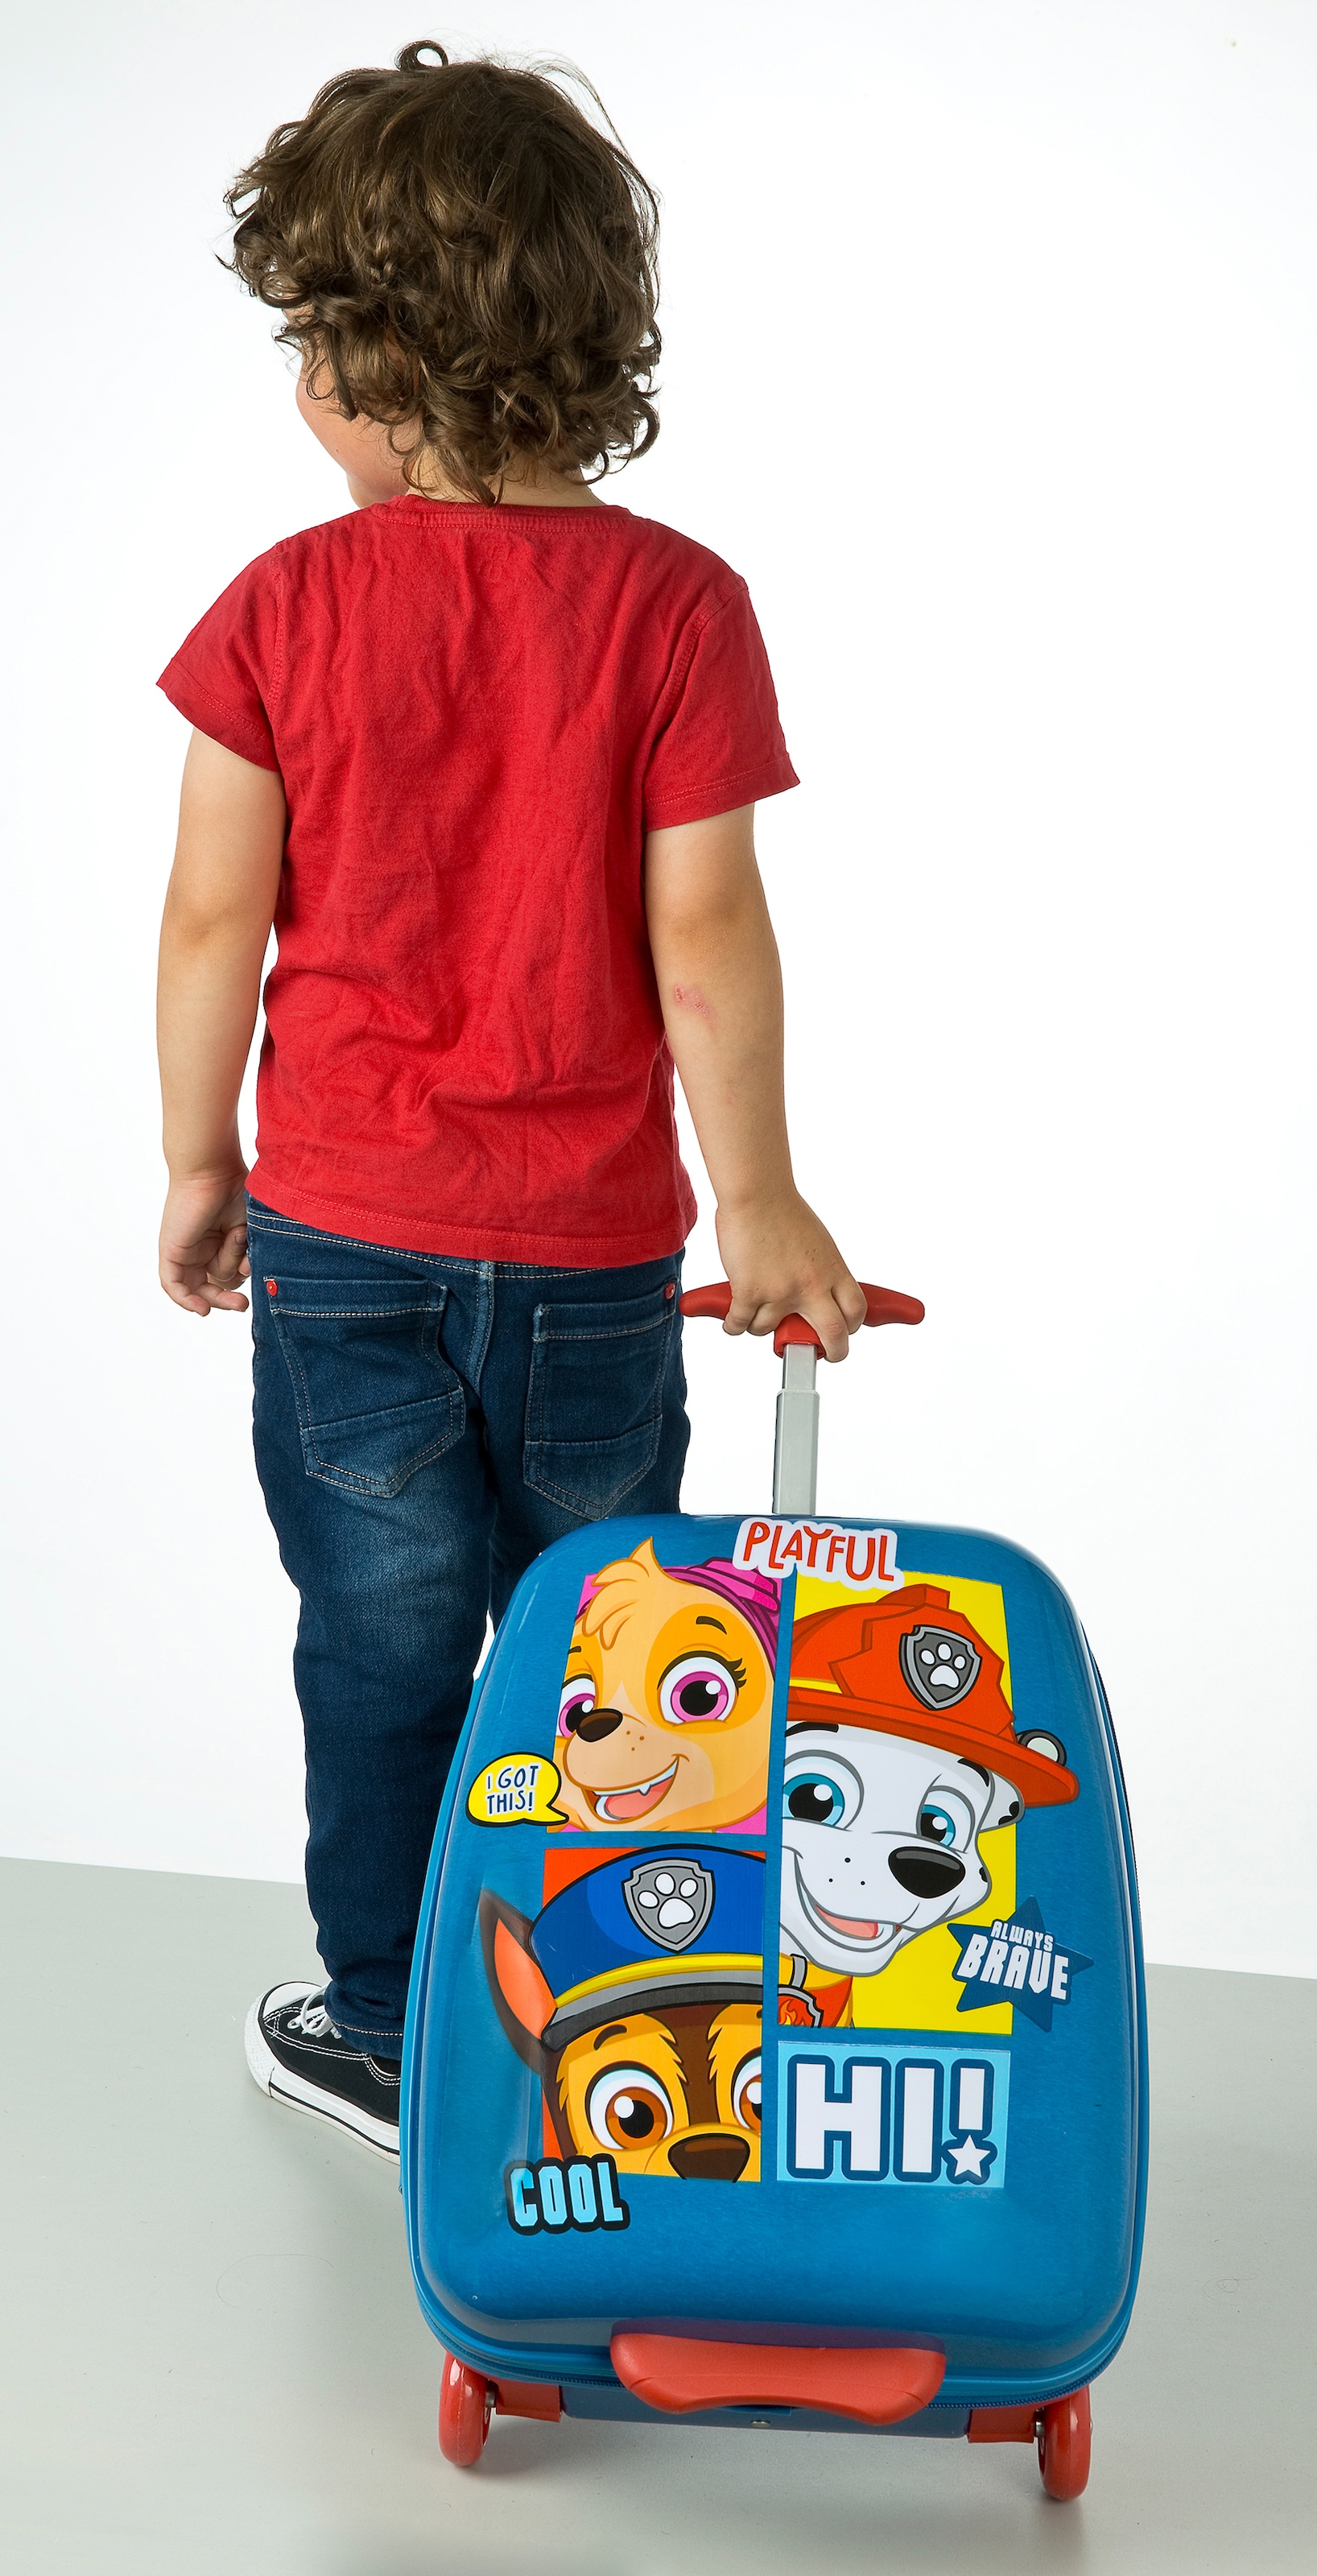 UNDERCOVER Kinderkoffer »PAW Patrol, 44 cm«, 2 Rollen